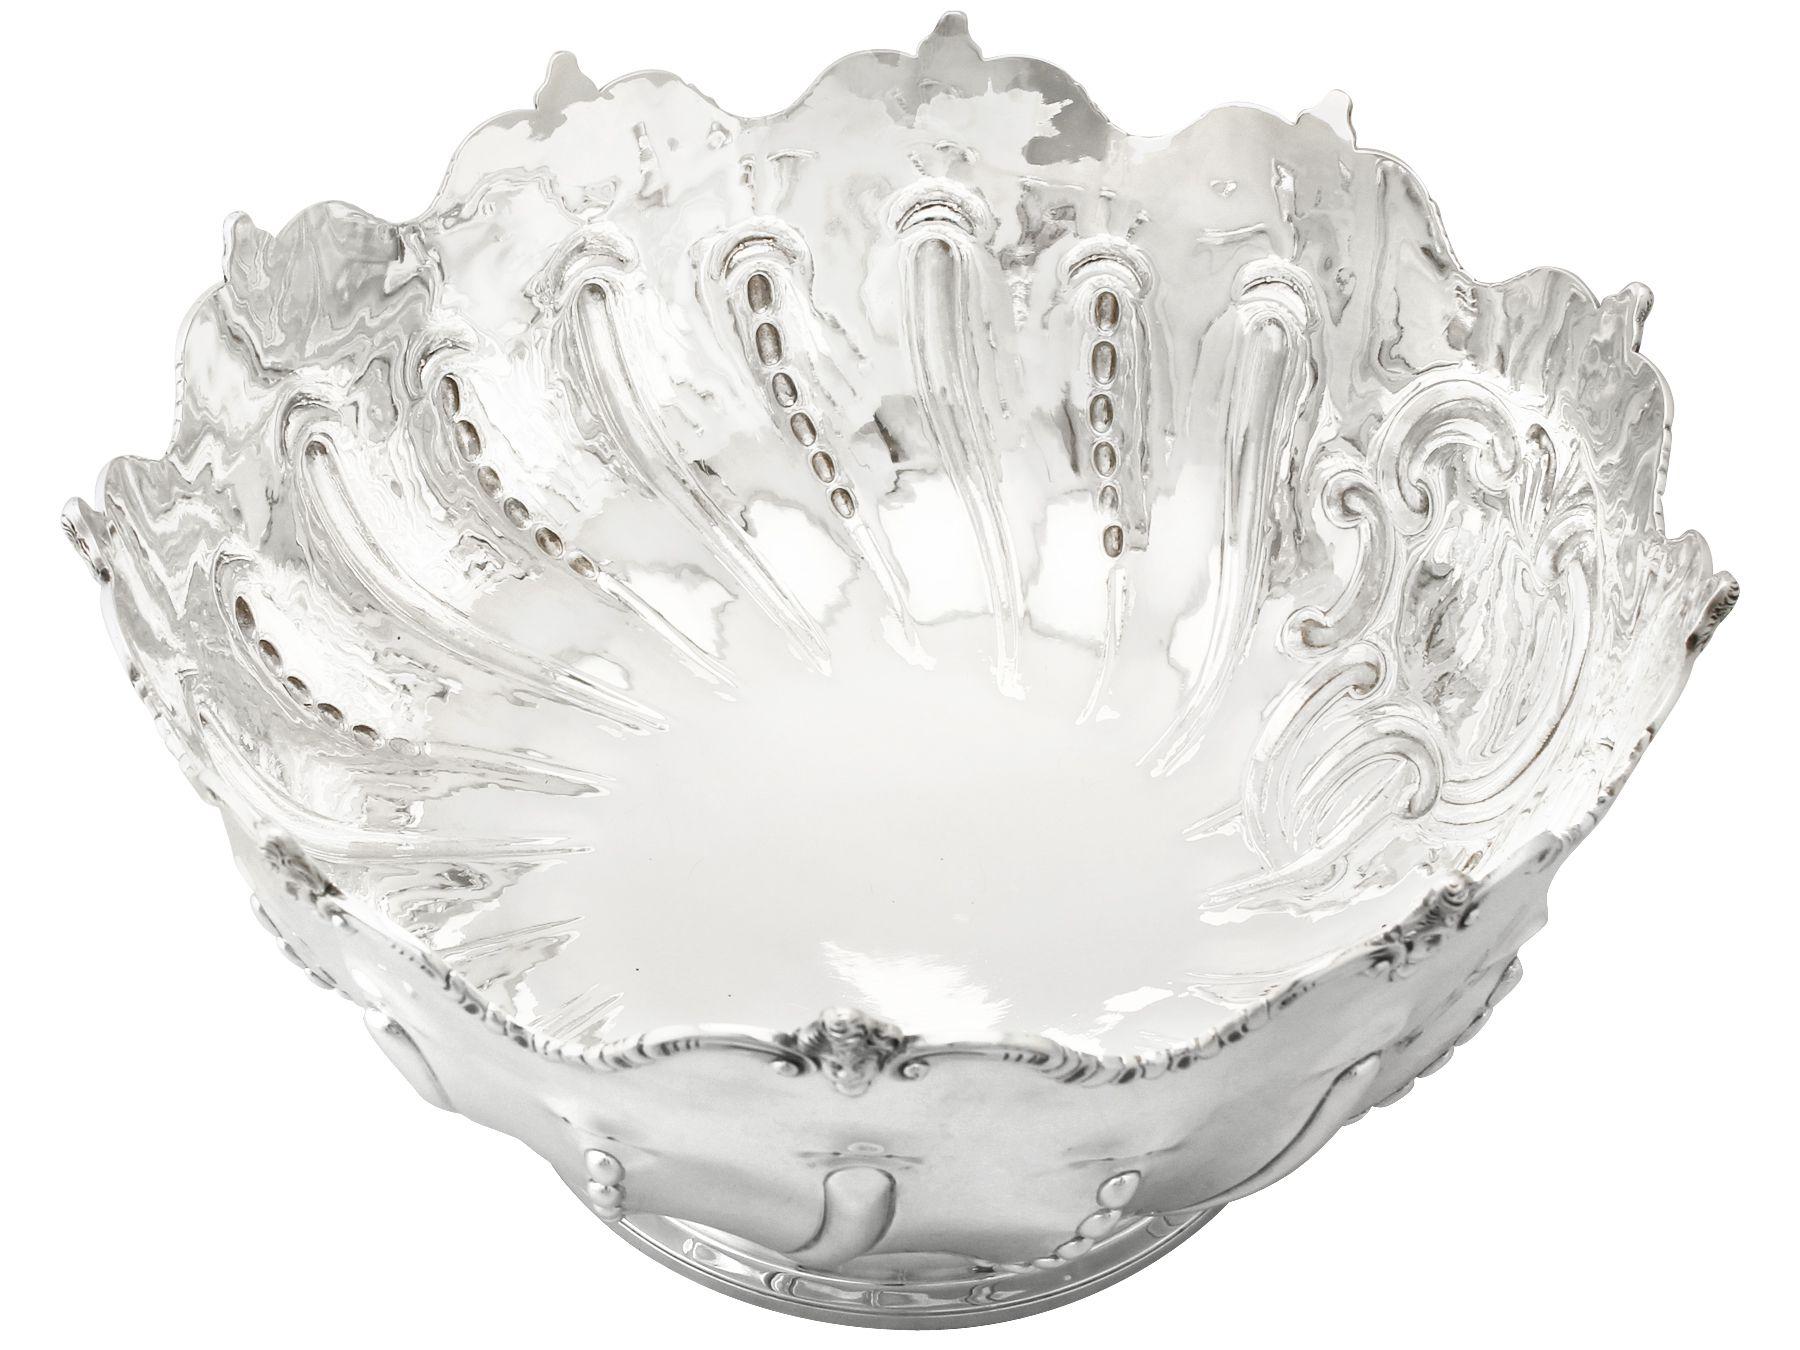 Antique Victorian 1890 Sterling Silver Presentation Bowl In Excellent Condition For Sale In Jesmond, Newcastle Upon Tyne